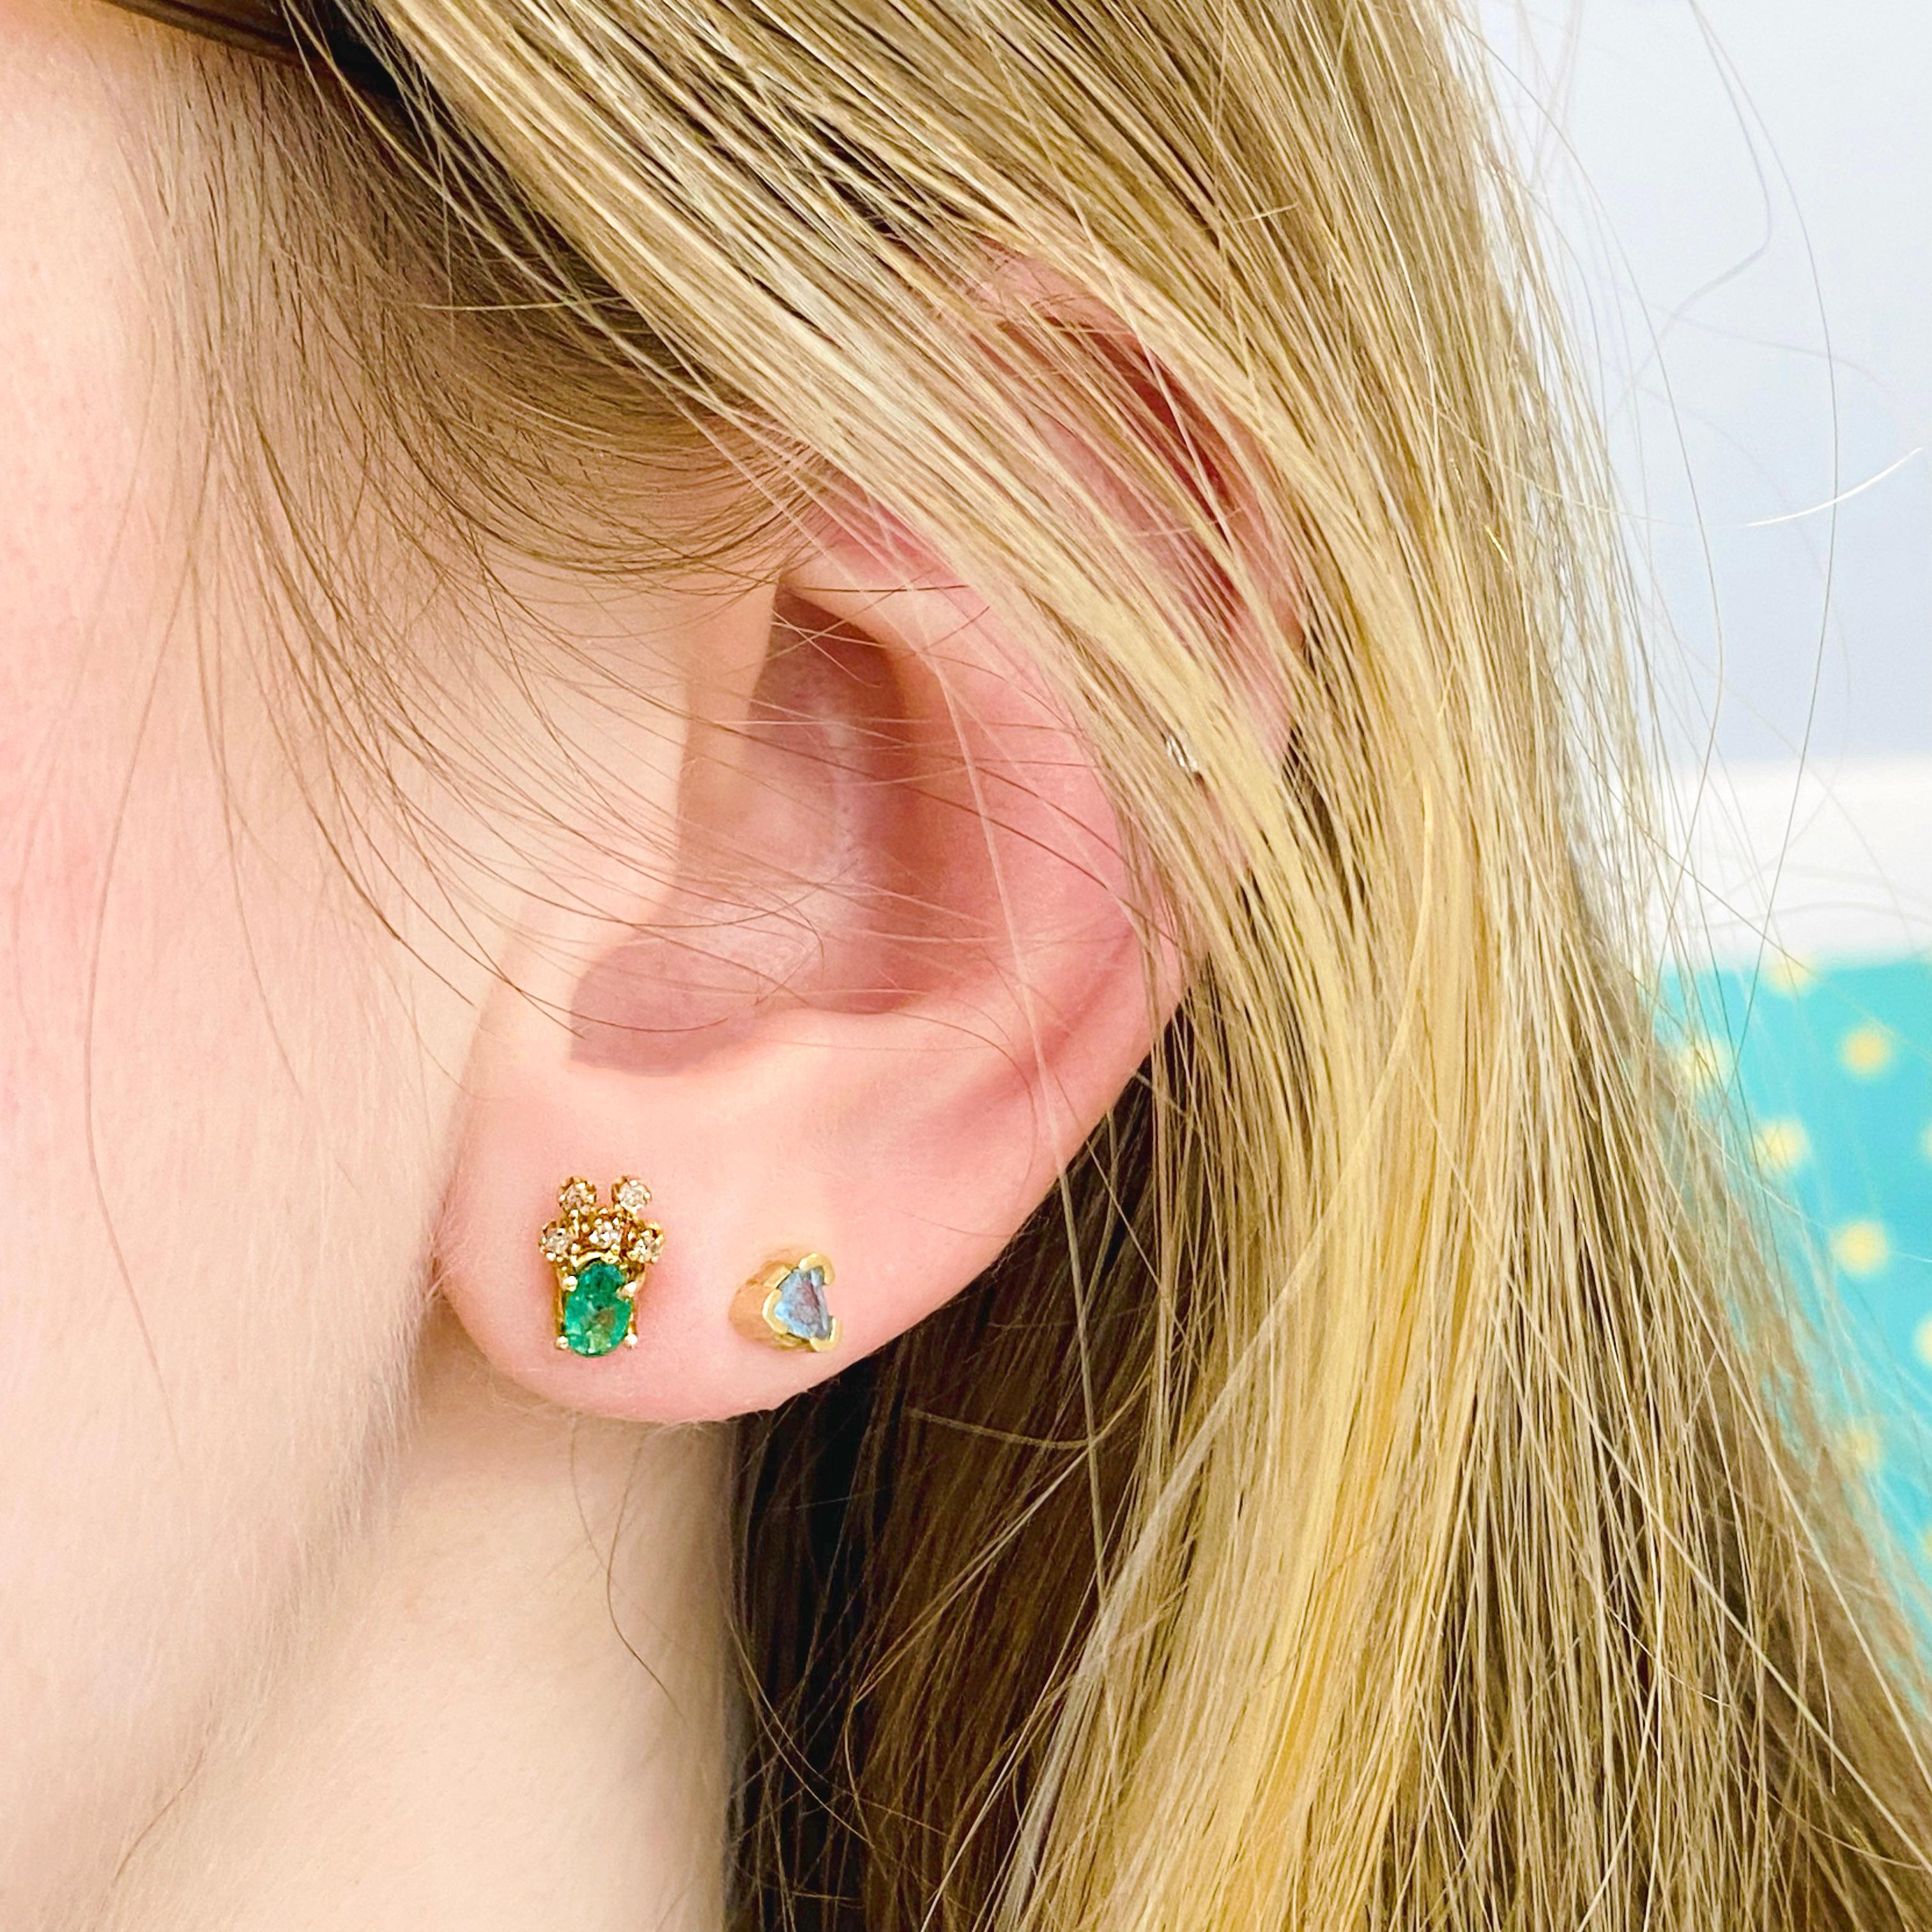 Contemporary Emerald Estate Earrings W Diamonds Handmade W 14k Solid Gold W Stud Posts, Green For Sale